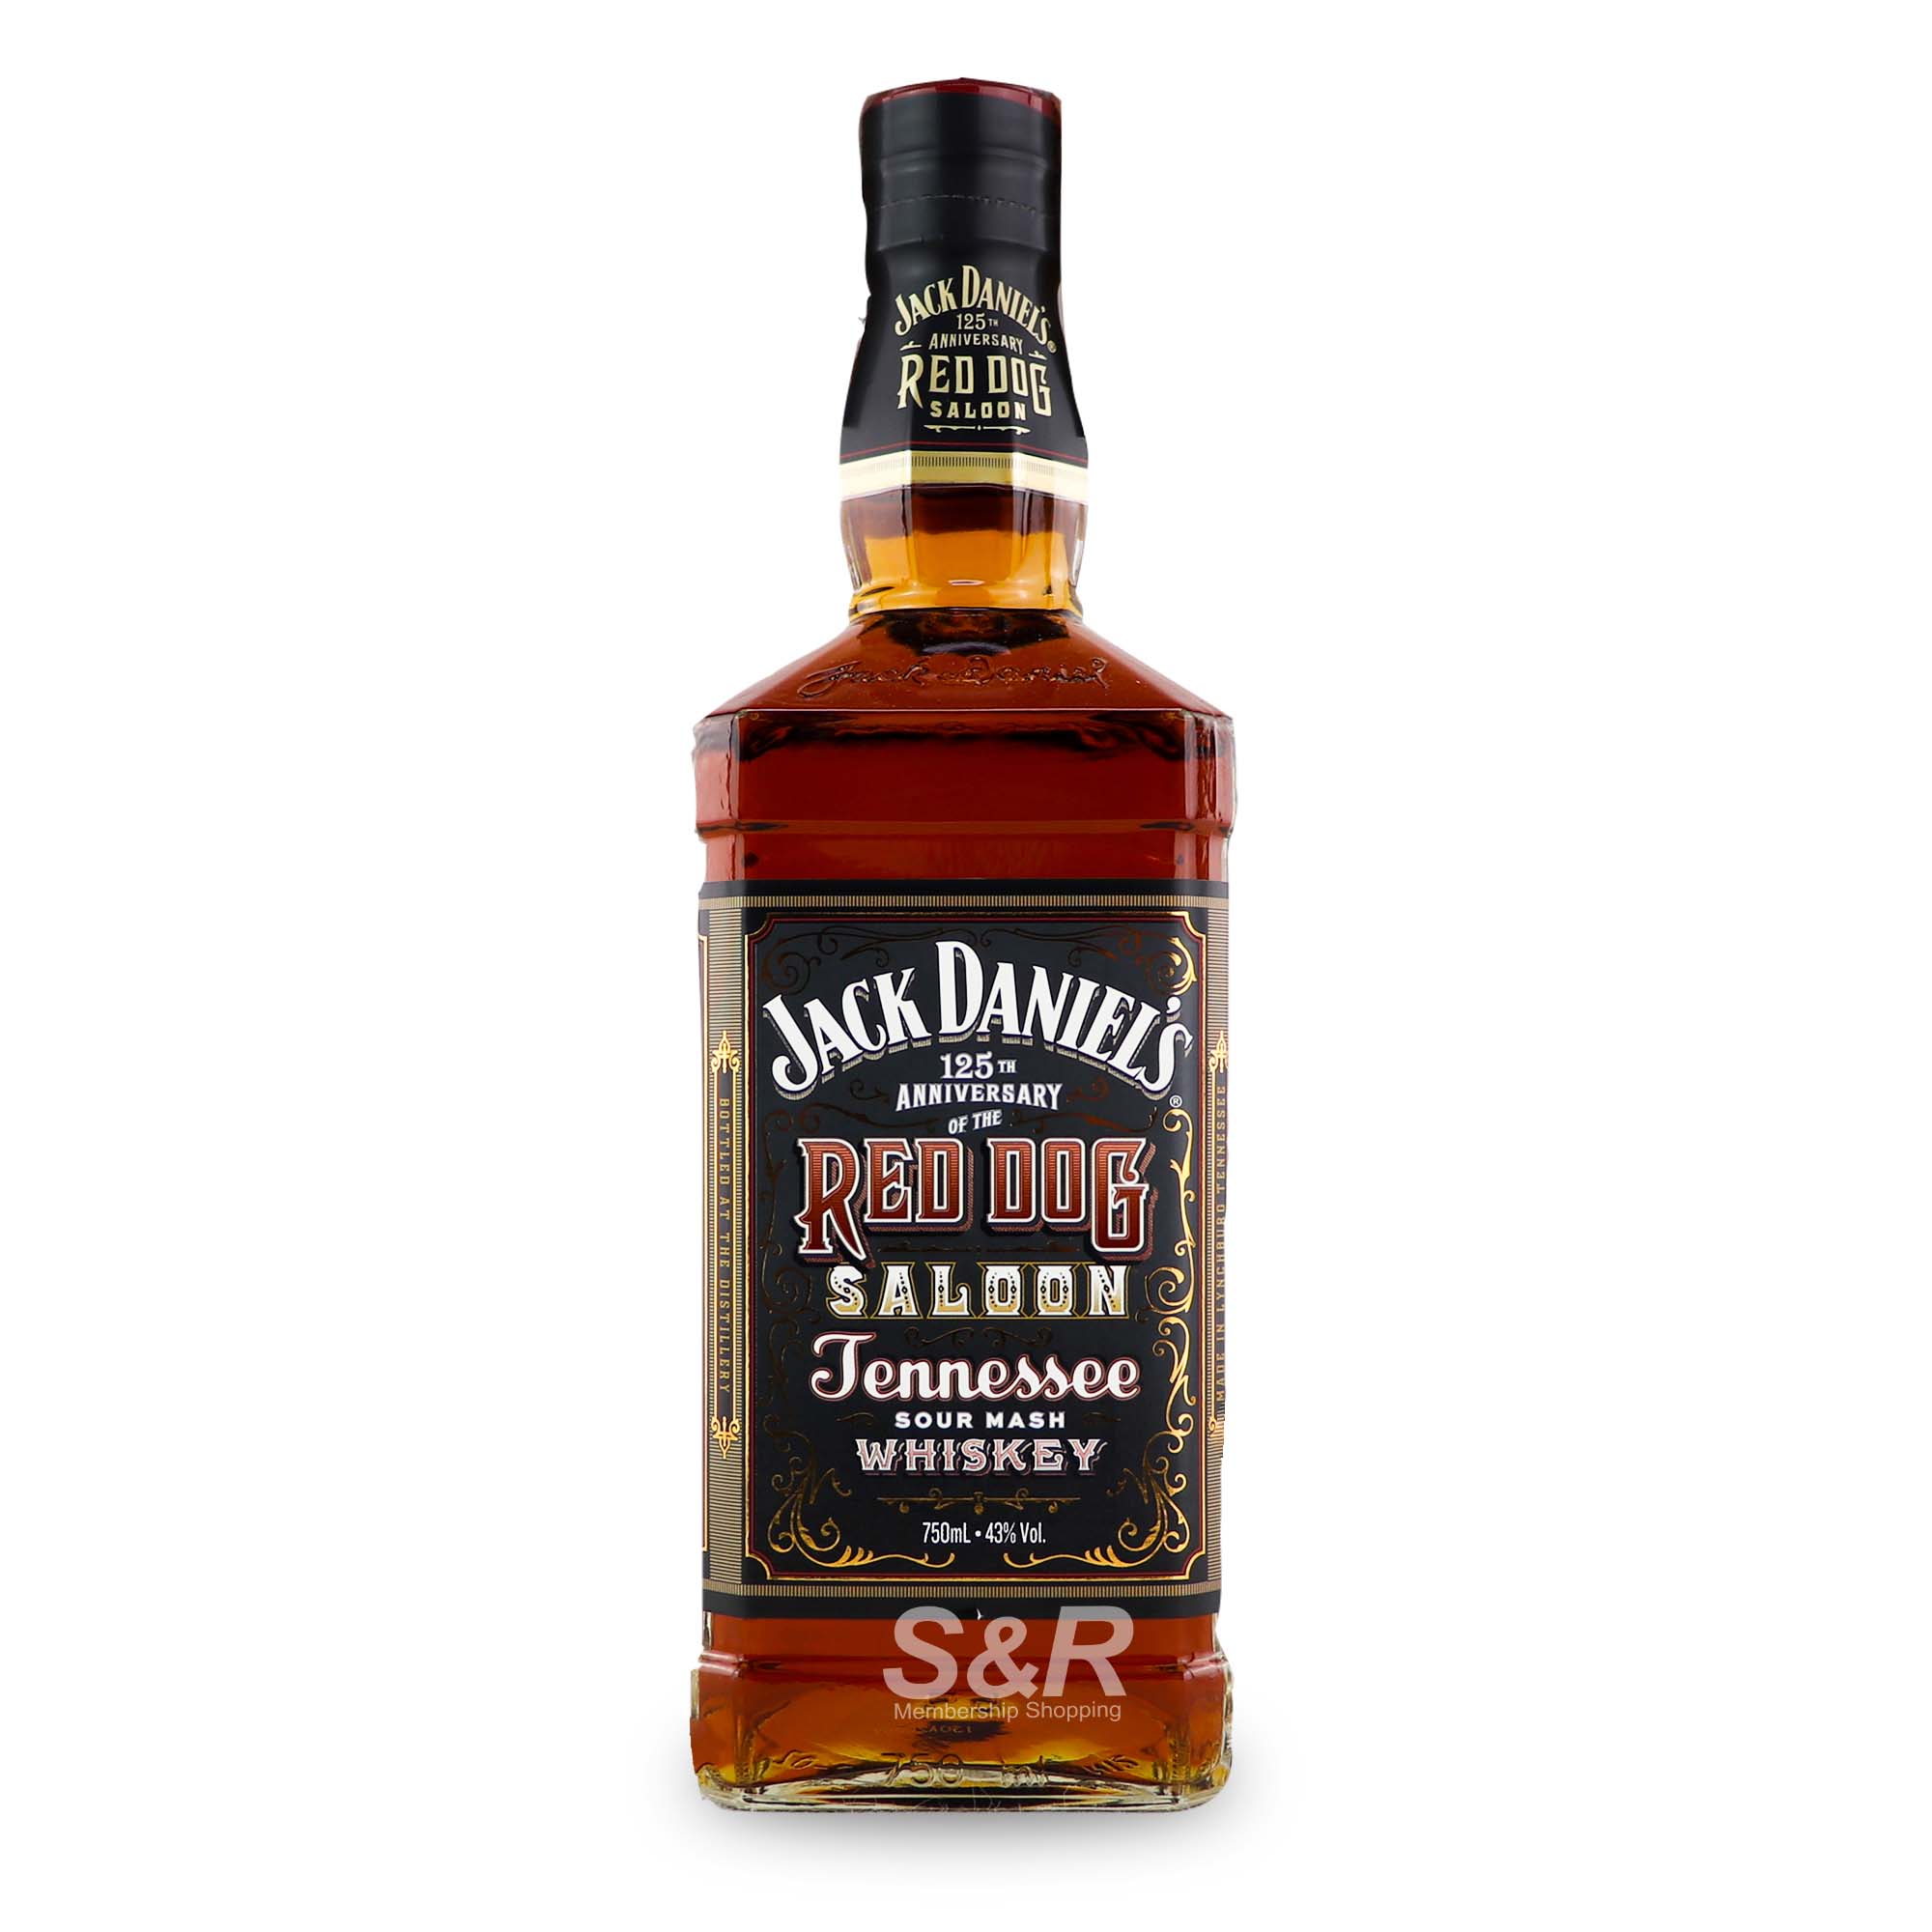 Jack Daniel's Red Dog Saloon Tennessee Sour Mash Whiskey 750mL